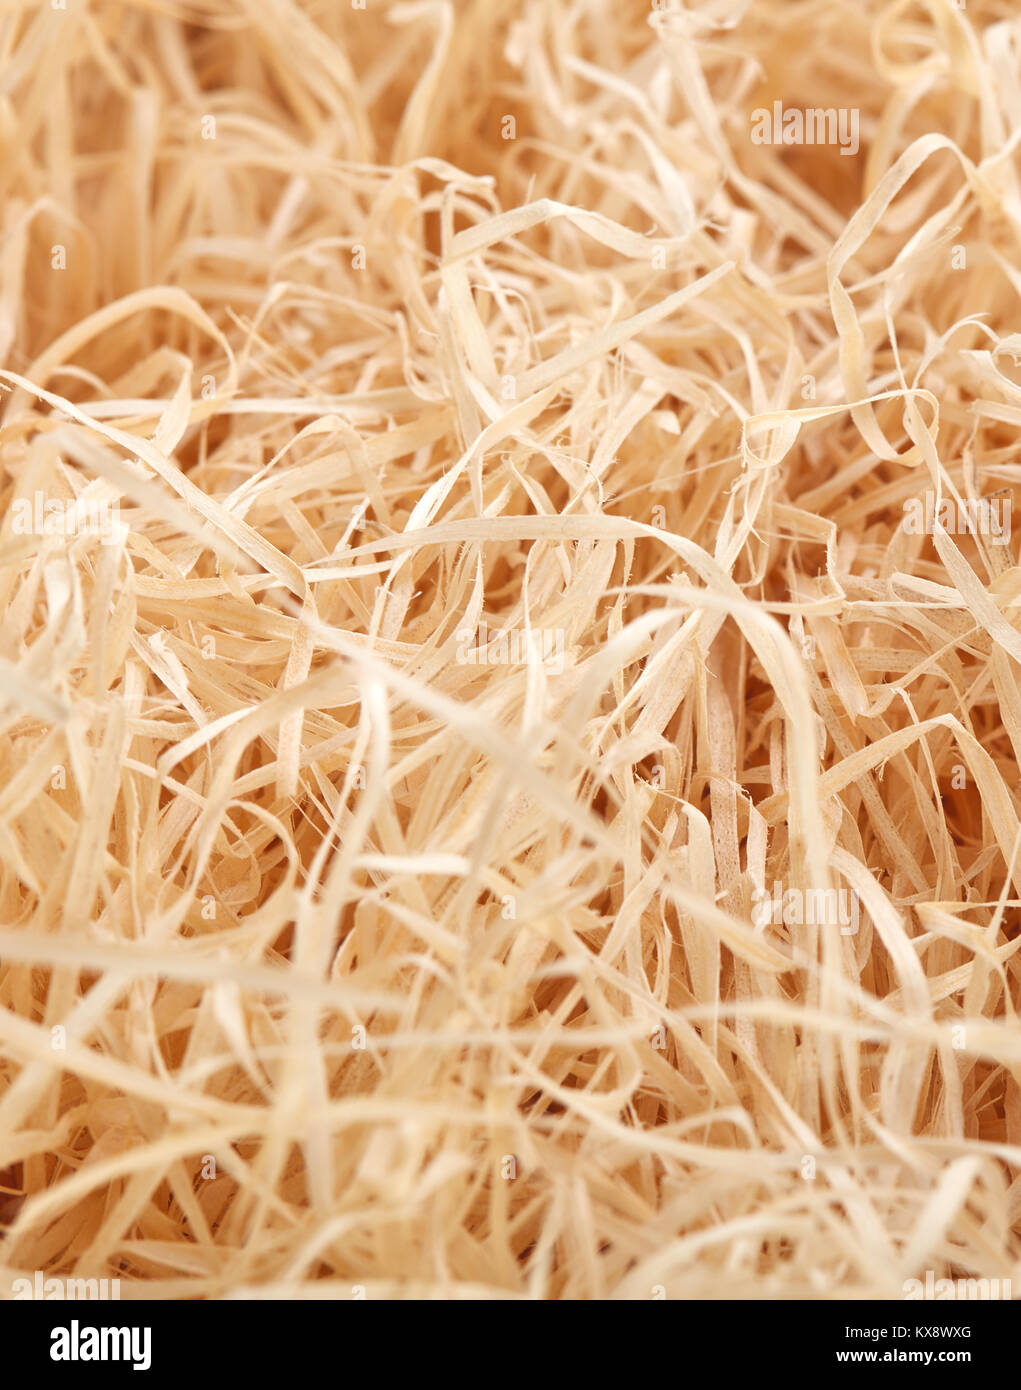 decorative straw, natural packing material Stock Photo - Alamy